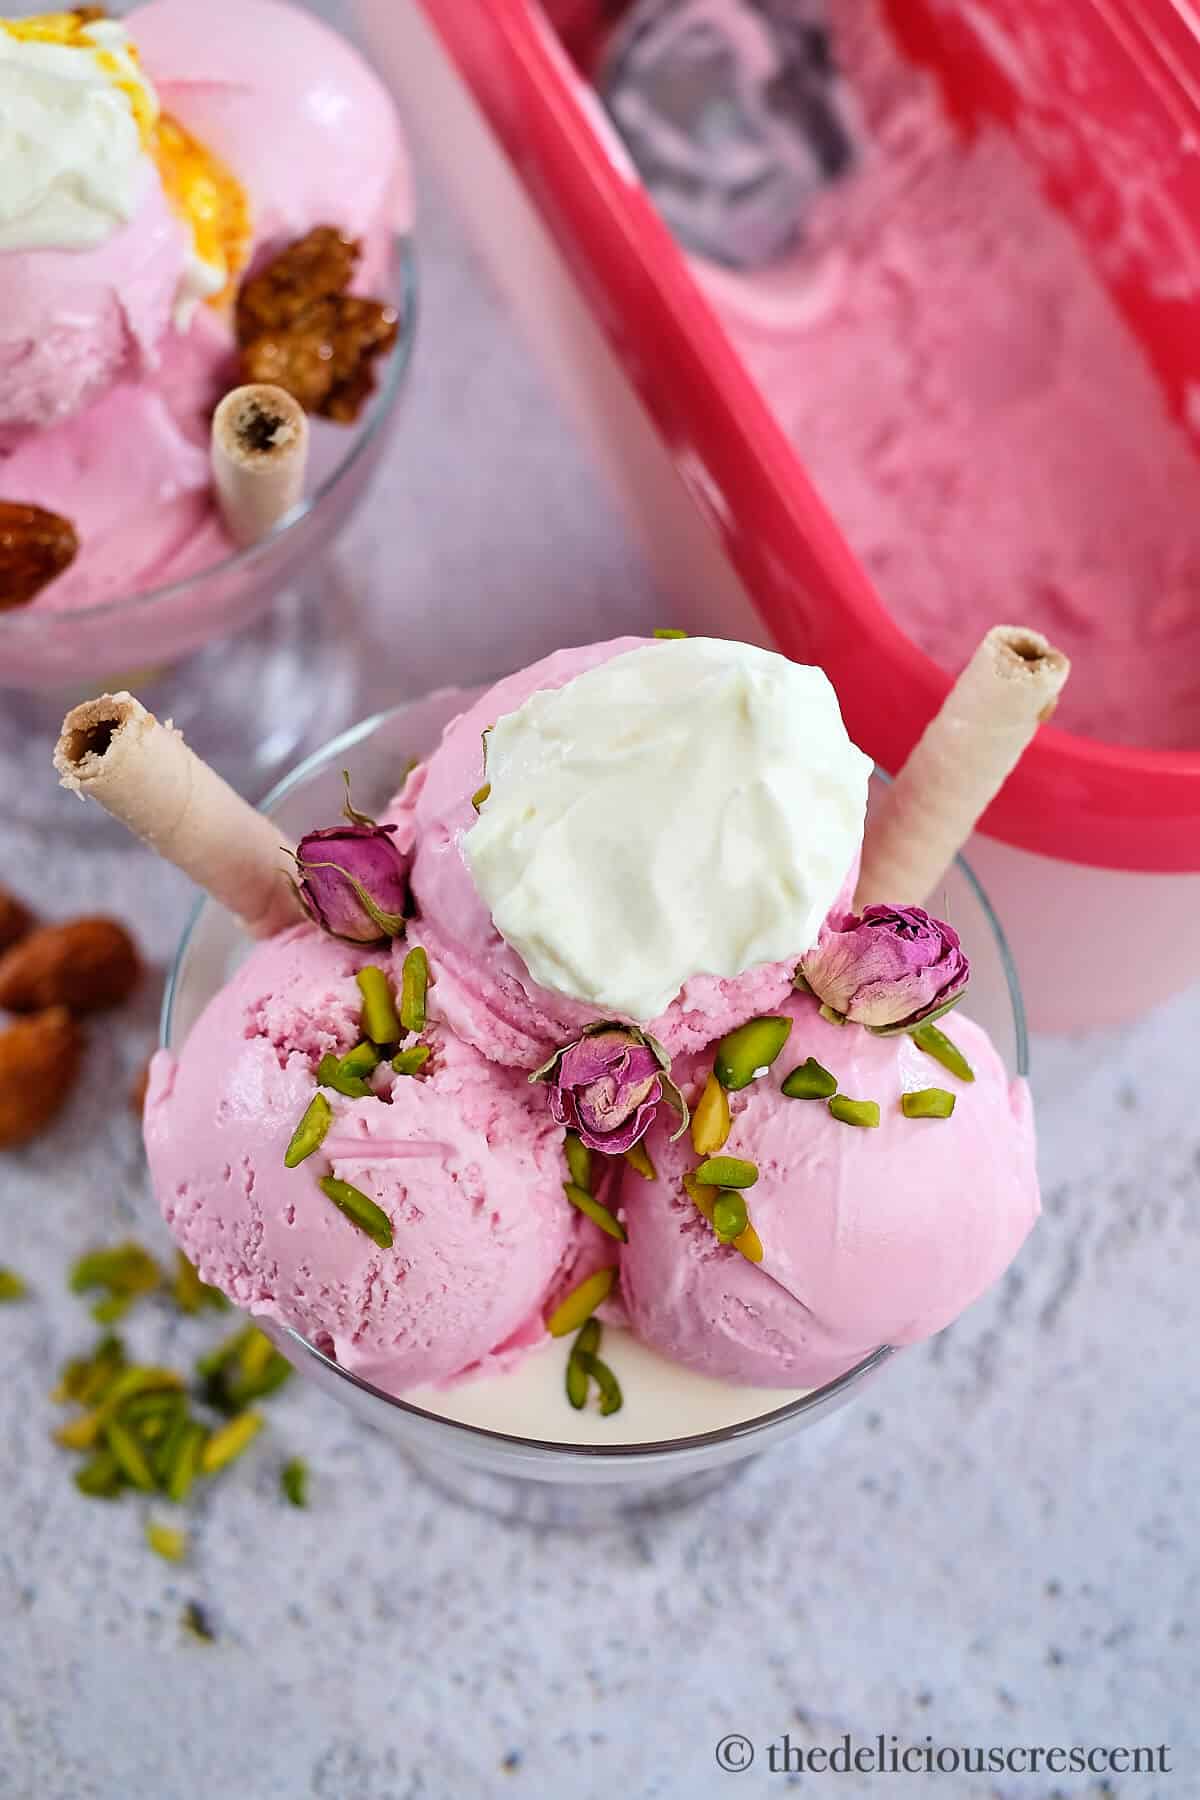 A dollop of cream and nuts over pink frozen treat.